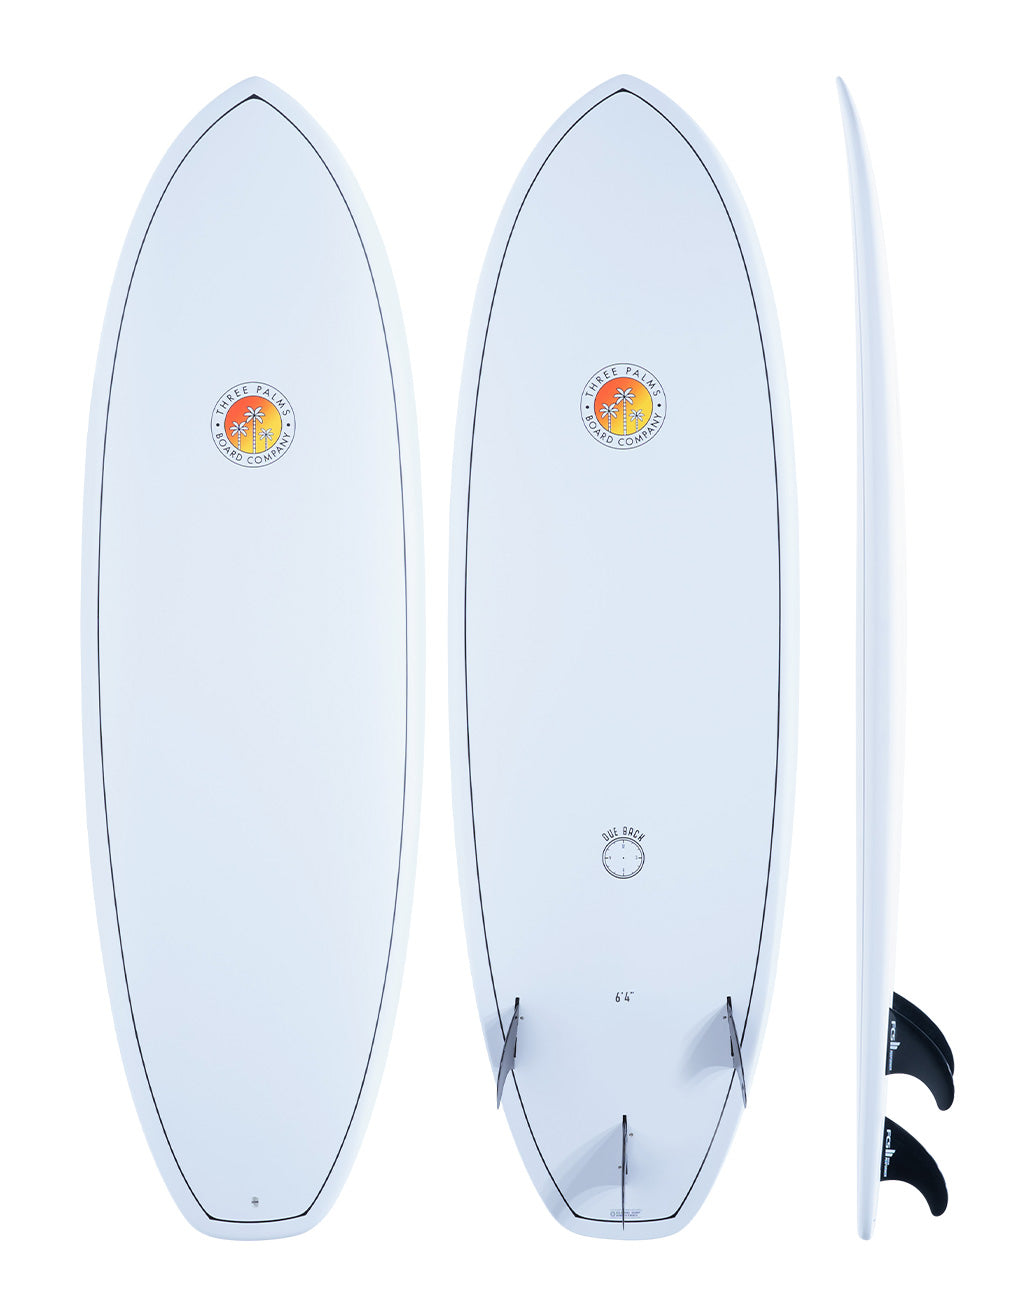 Three Palms Board Co Surfboards - Due Back white surfboard